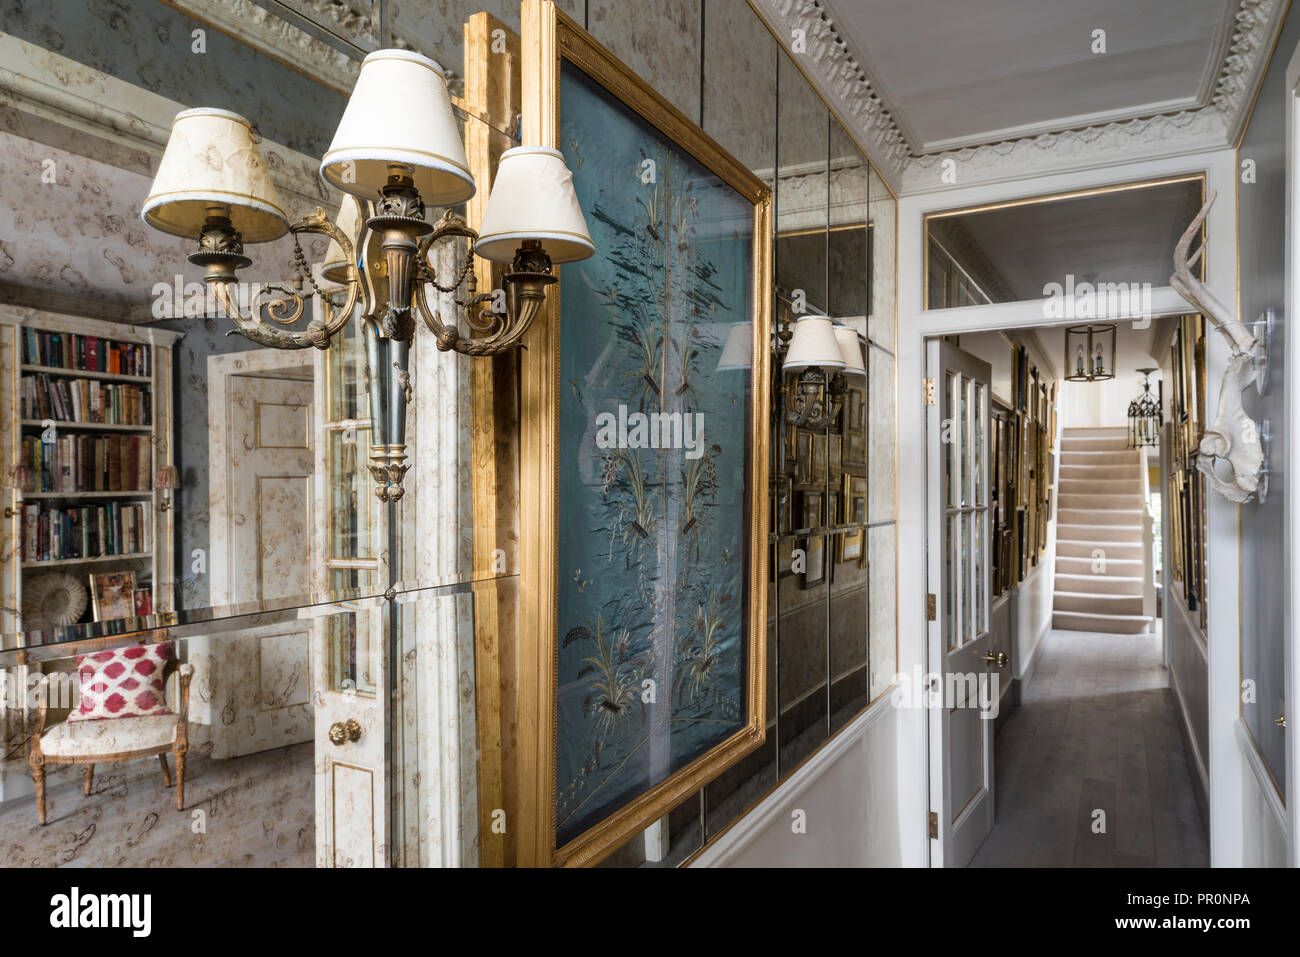 Mirrored hallway entrance with gilt framed embroidery and antique lamps Stock Photo